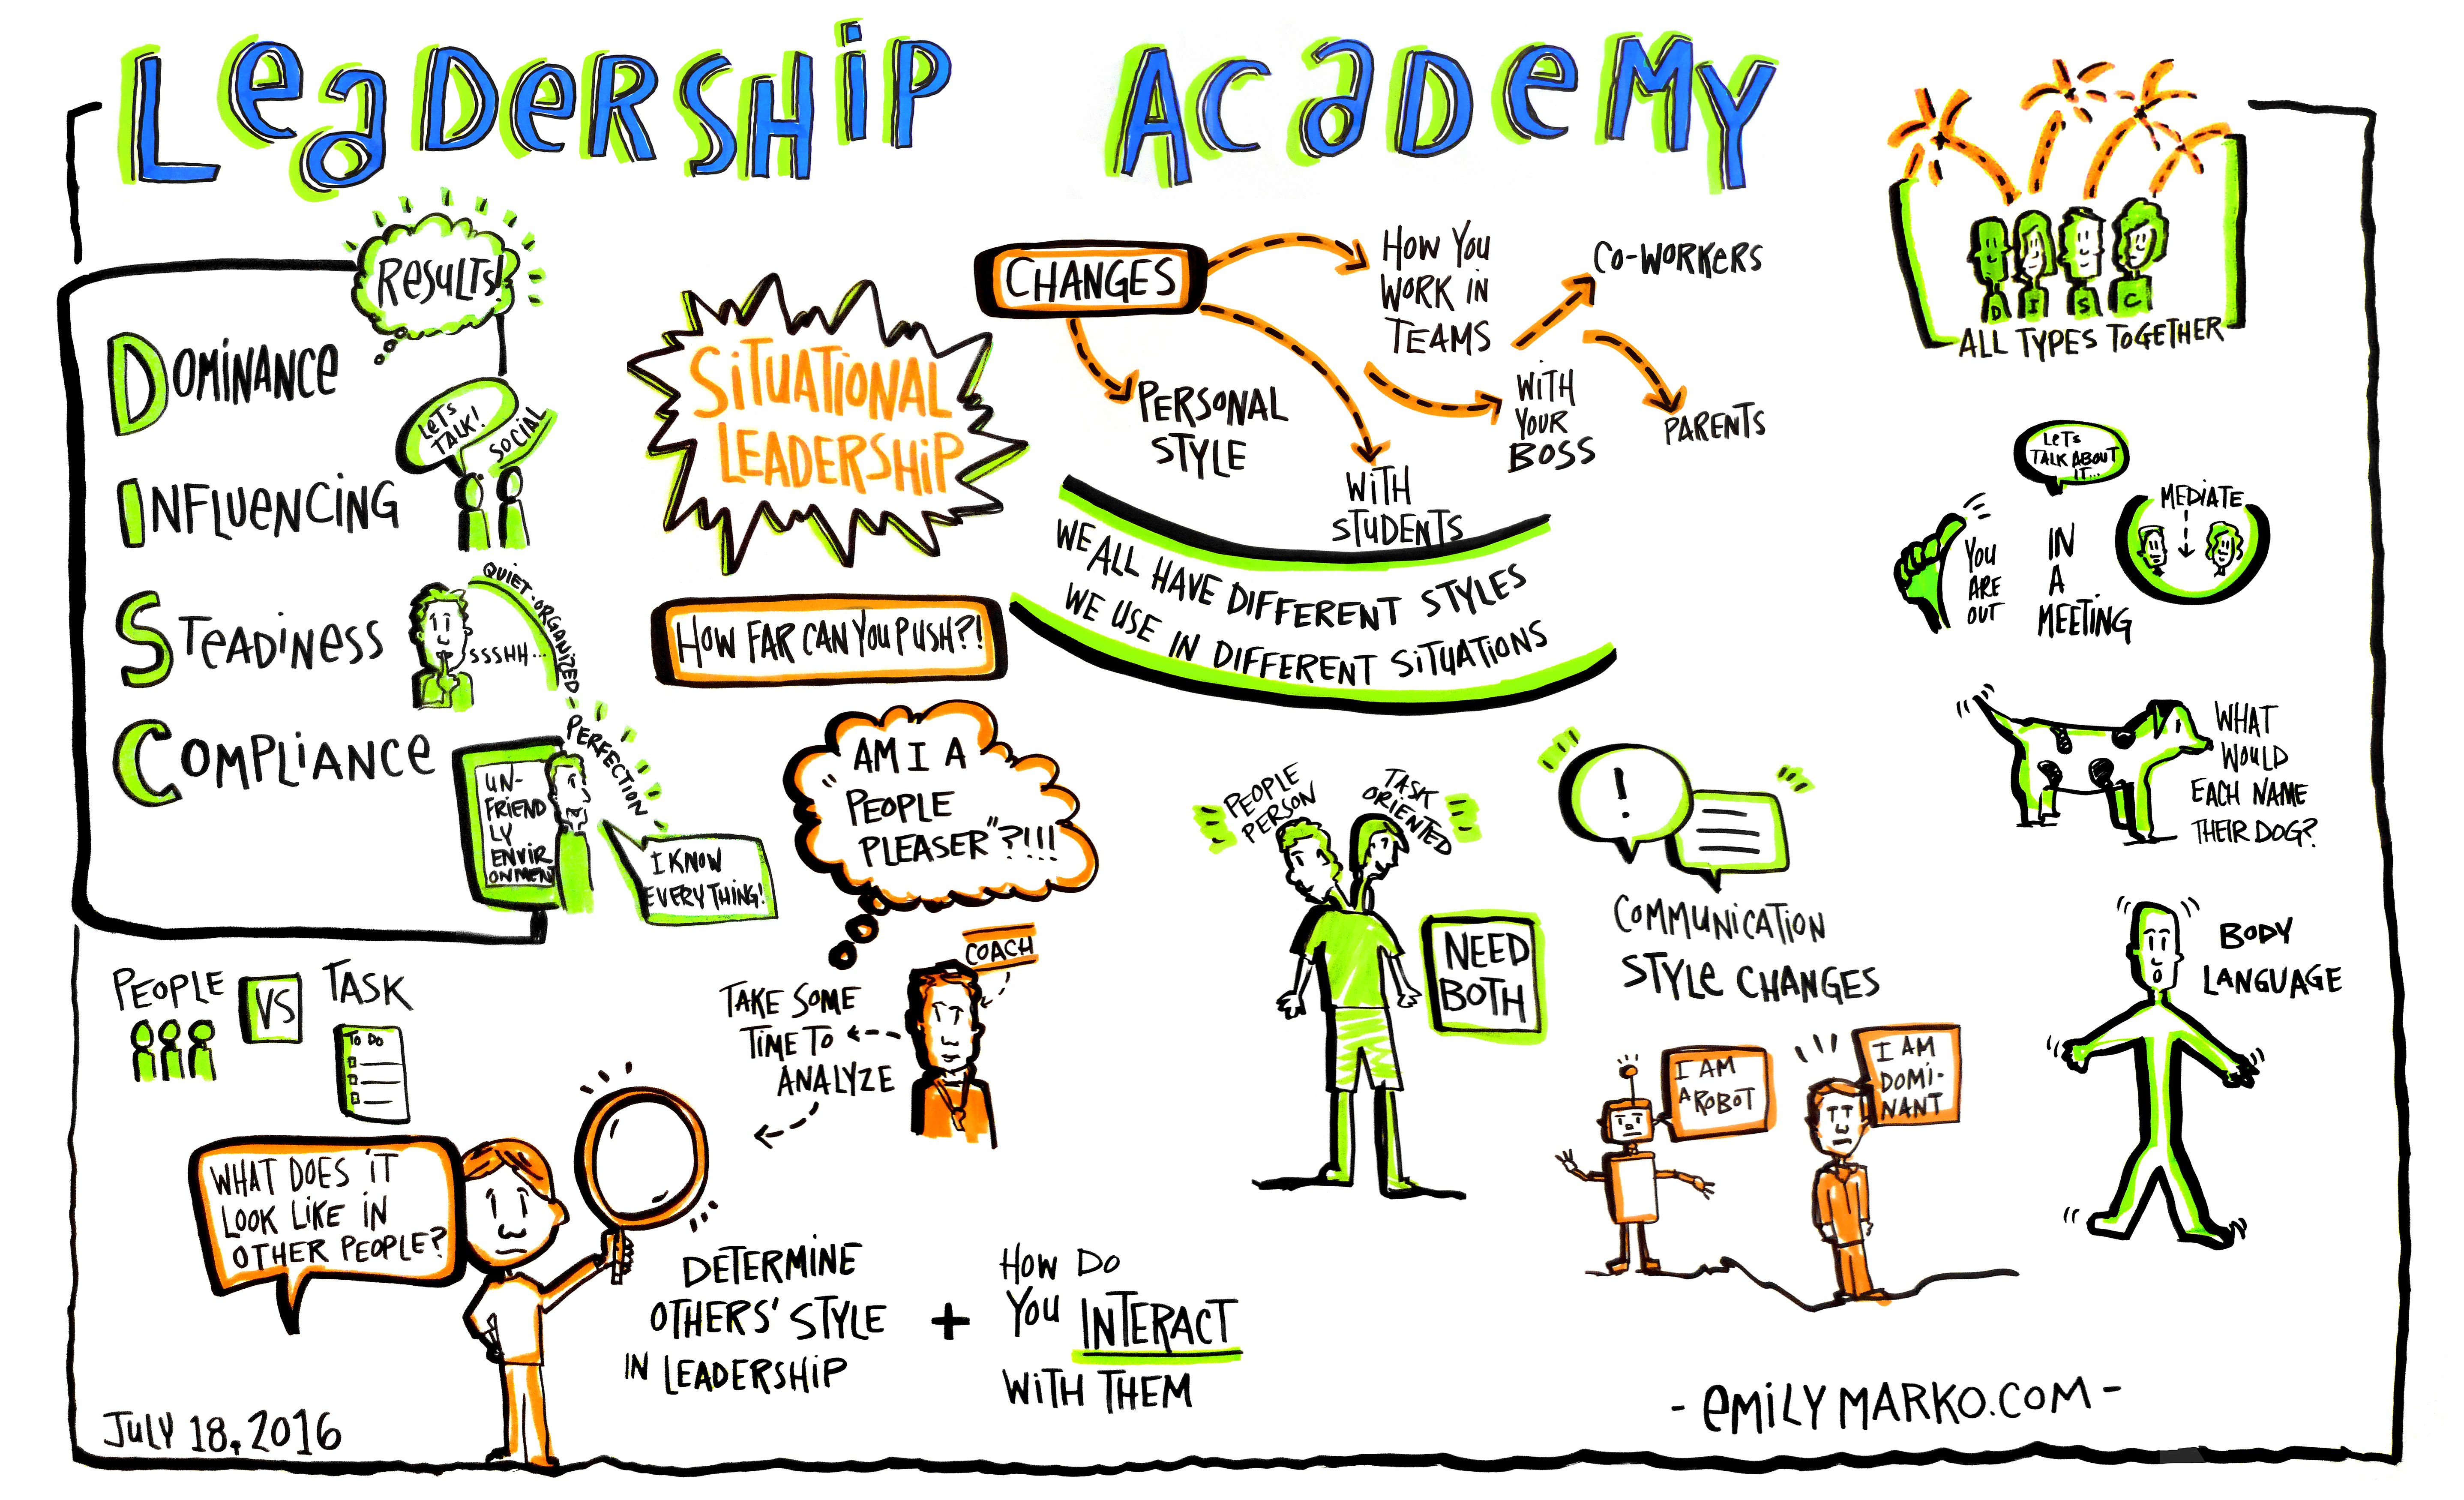 The image depicts visual notes taken by Emily Marko at Leadership Academy